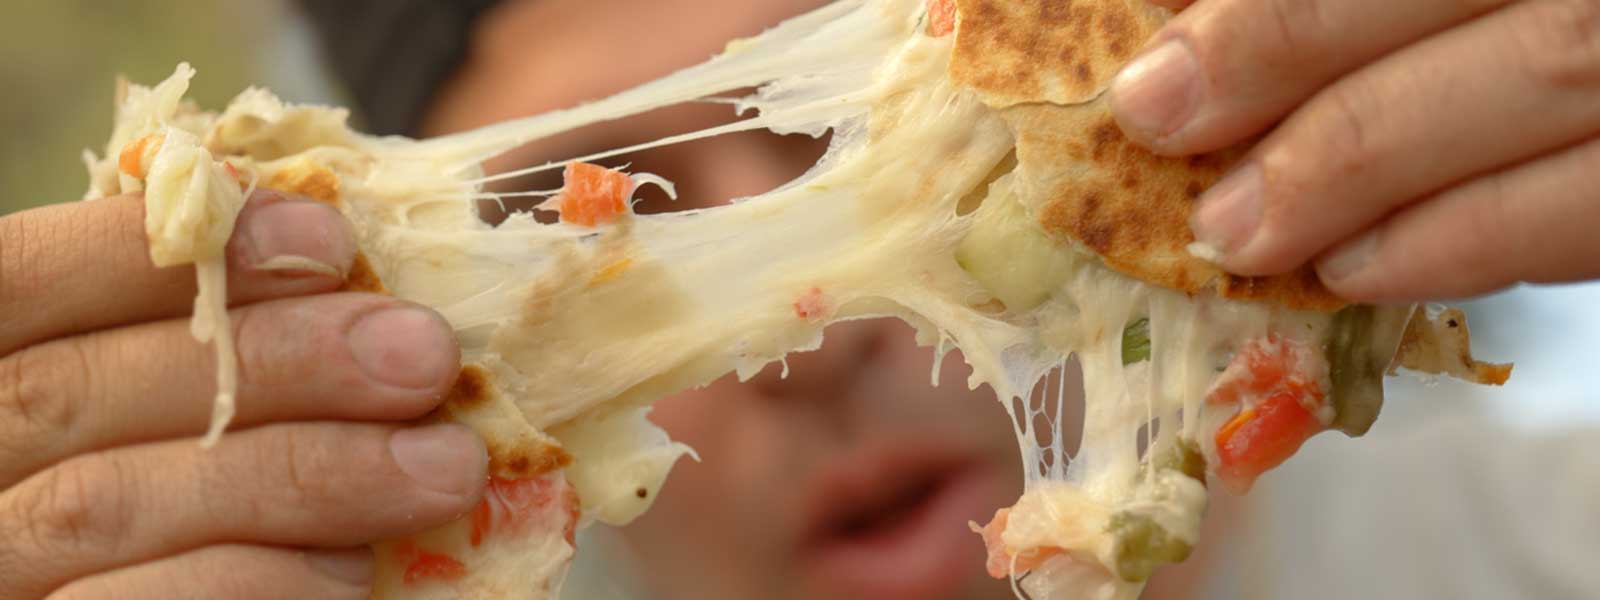 Man pulling a cheesy quesadilla apart in front of his face